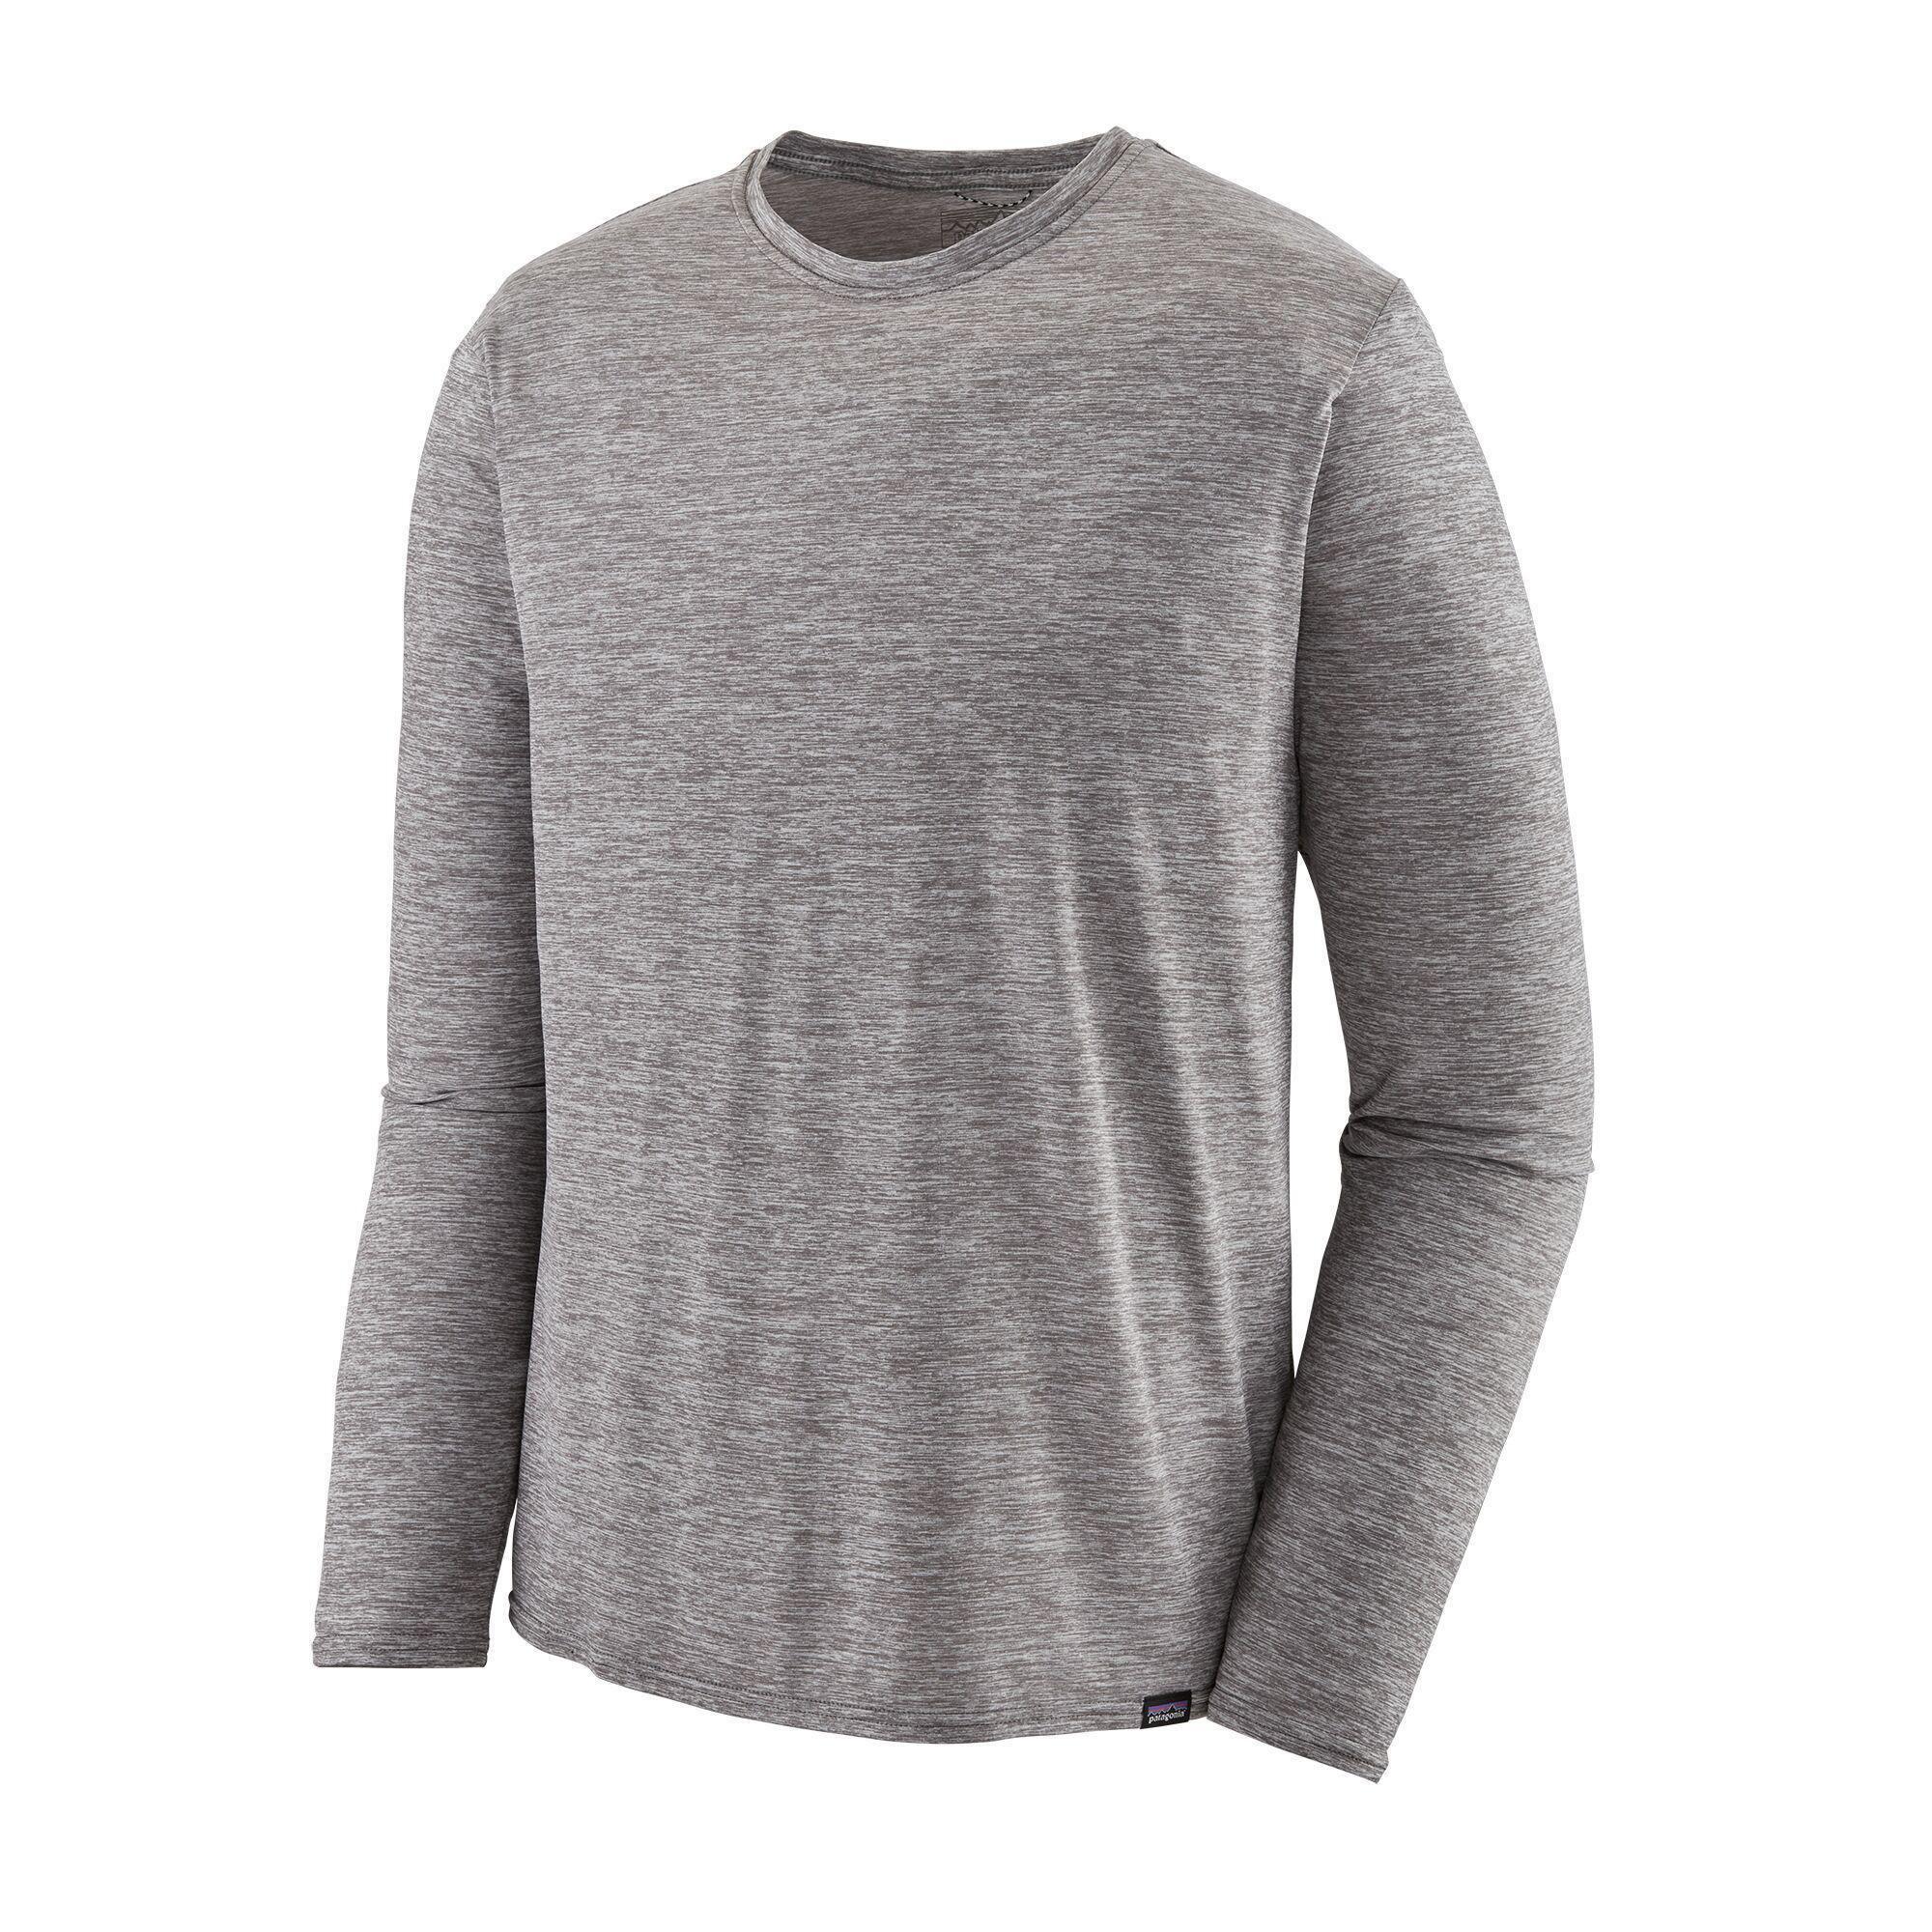 Second Baselayer Top